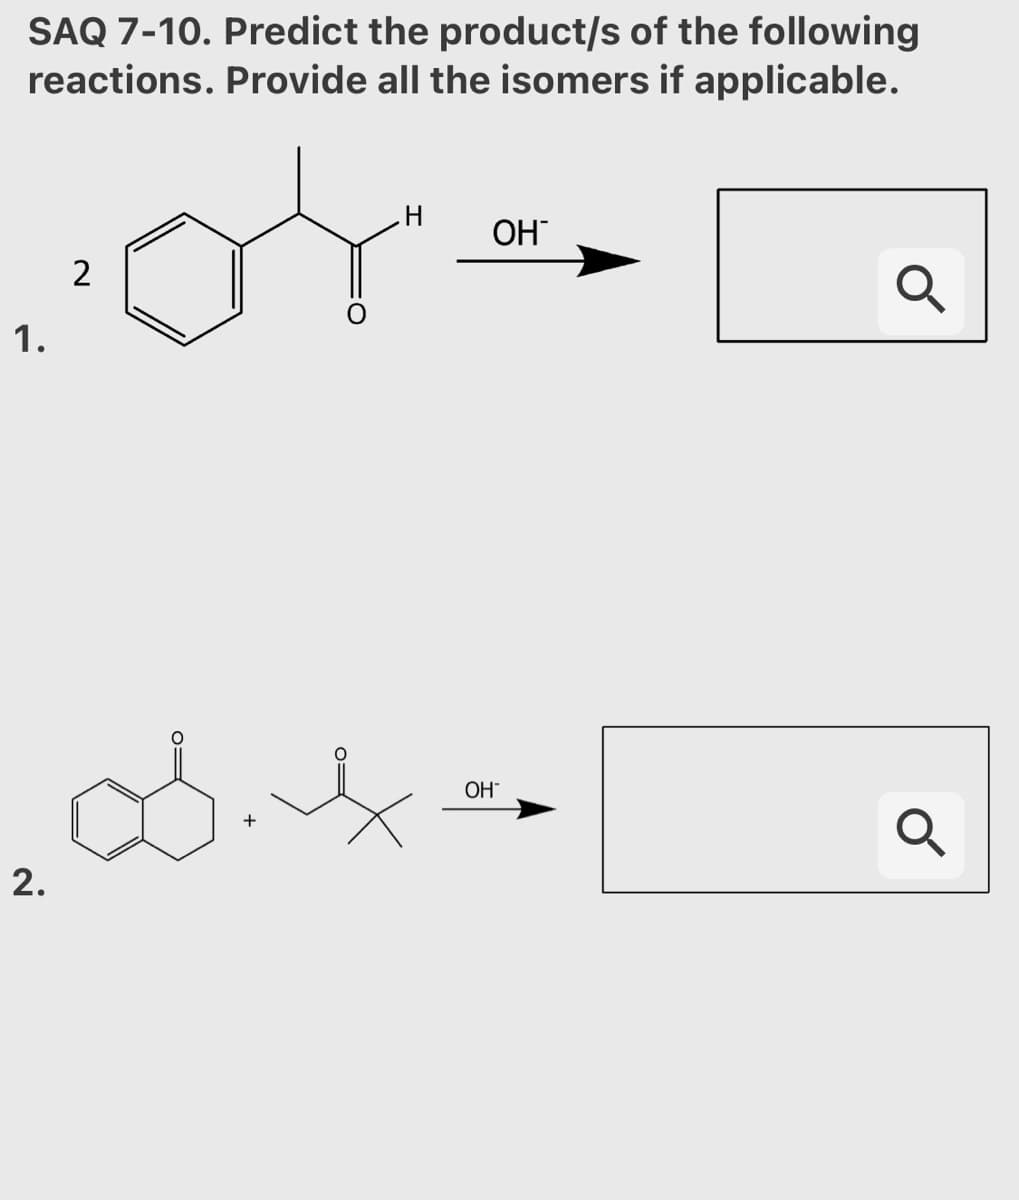 SAQ 7-10. Predict the product/s of the following
reactions. Provide all the isomers if applicable.
OH
2
1.
OH"
2.
o=
